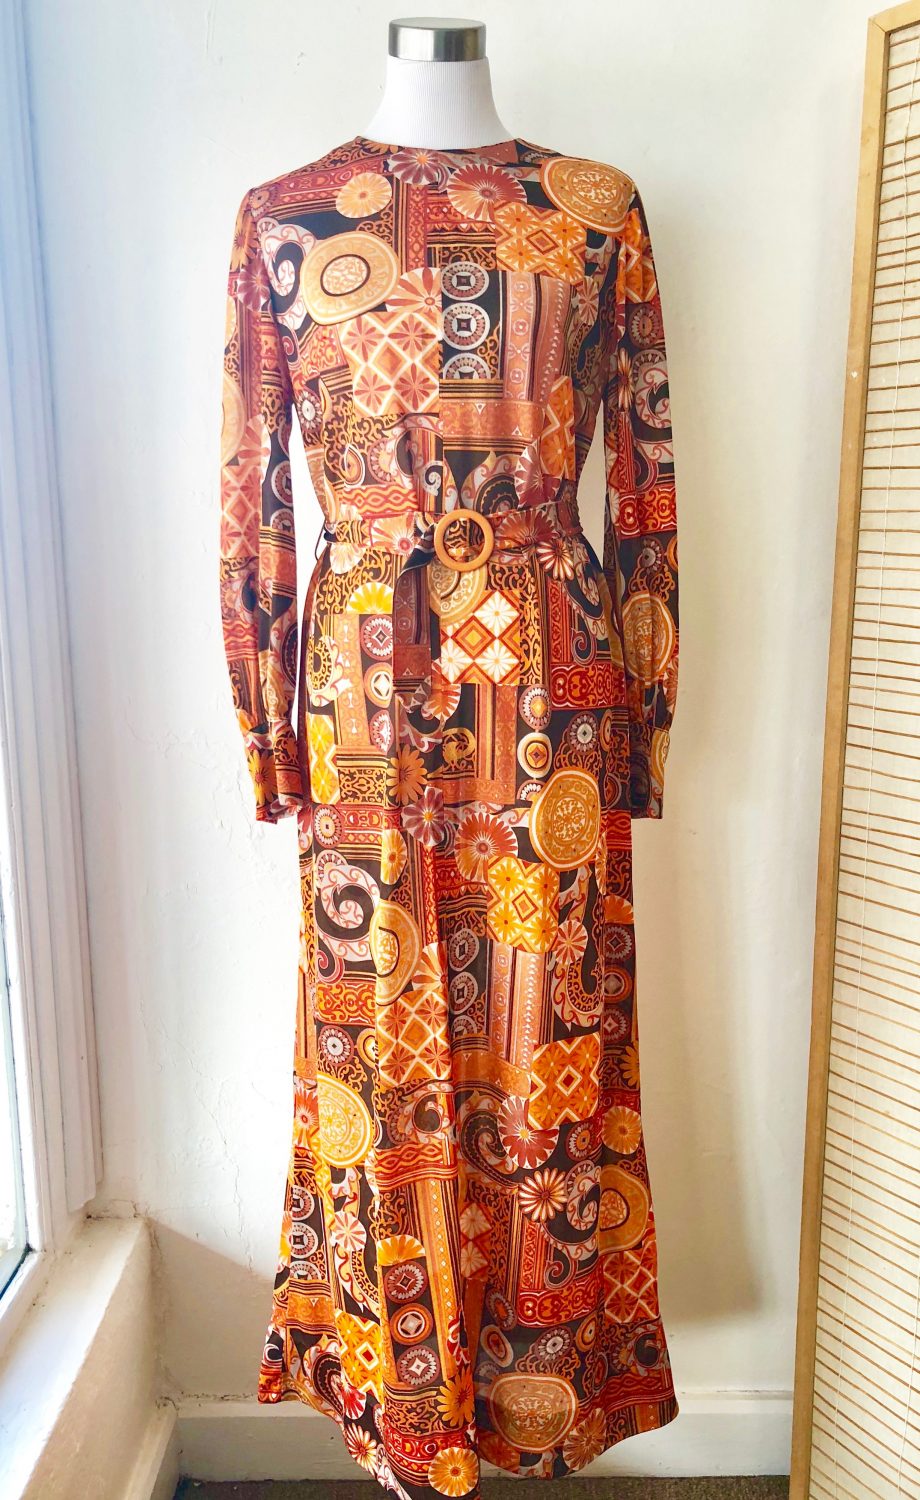 Amazing Orange and Brown 1970s Patterned Dress | Chaos Bazaar Vintage